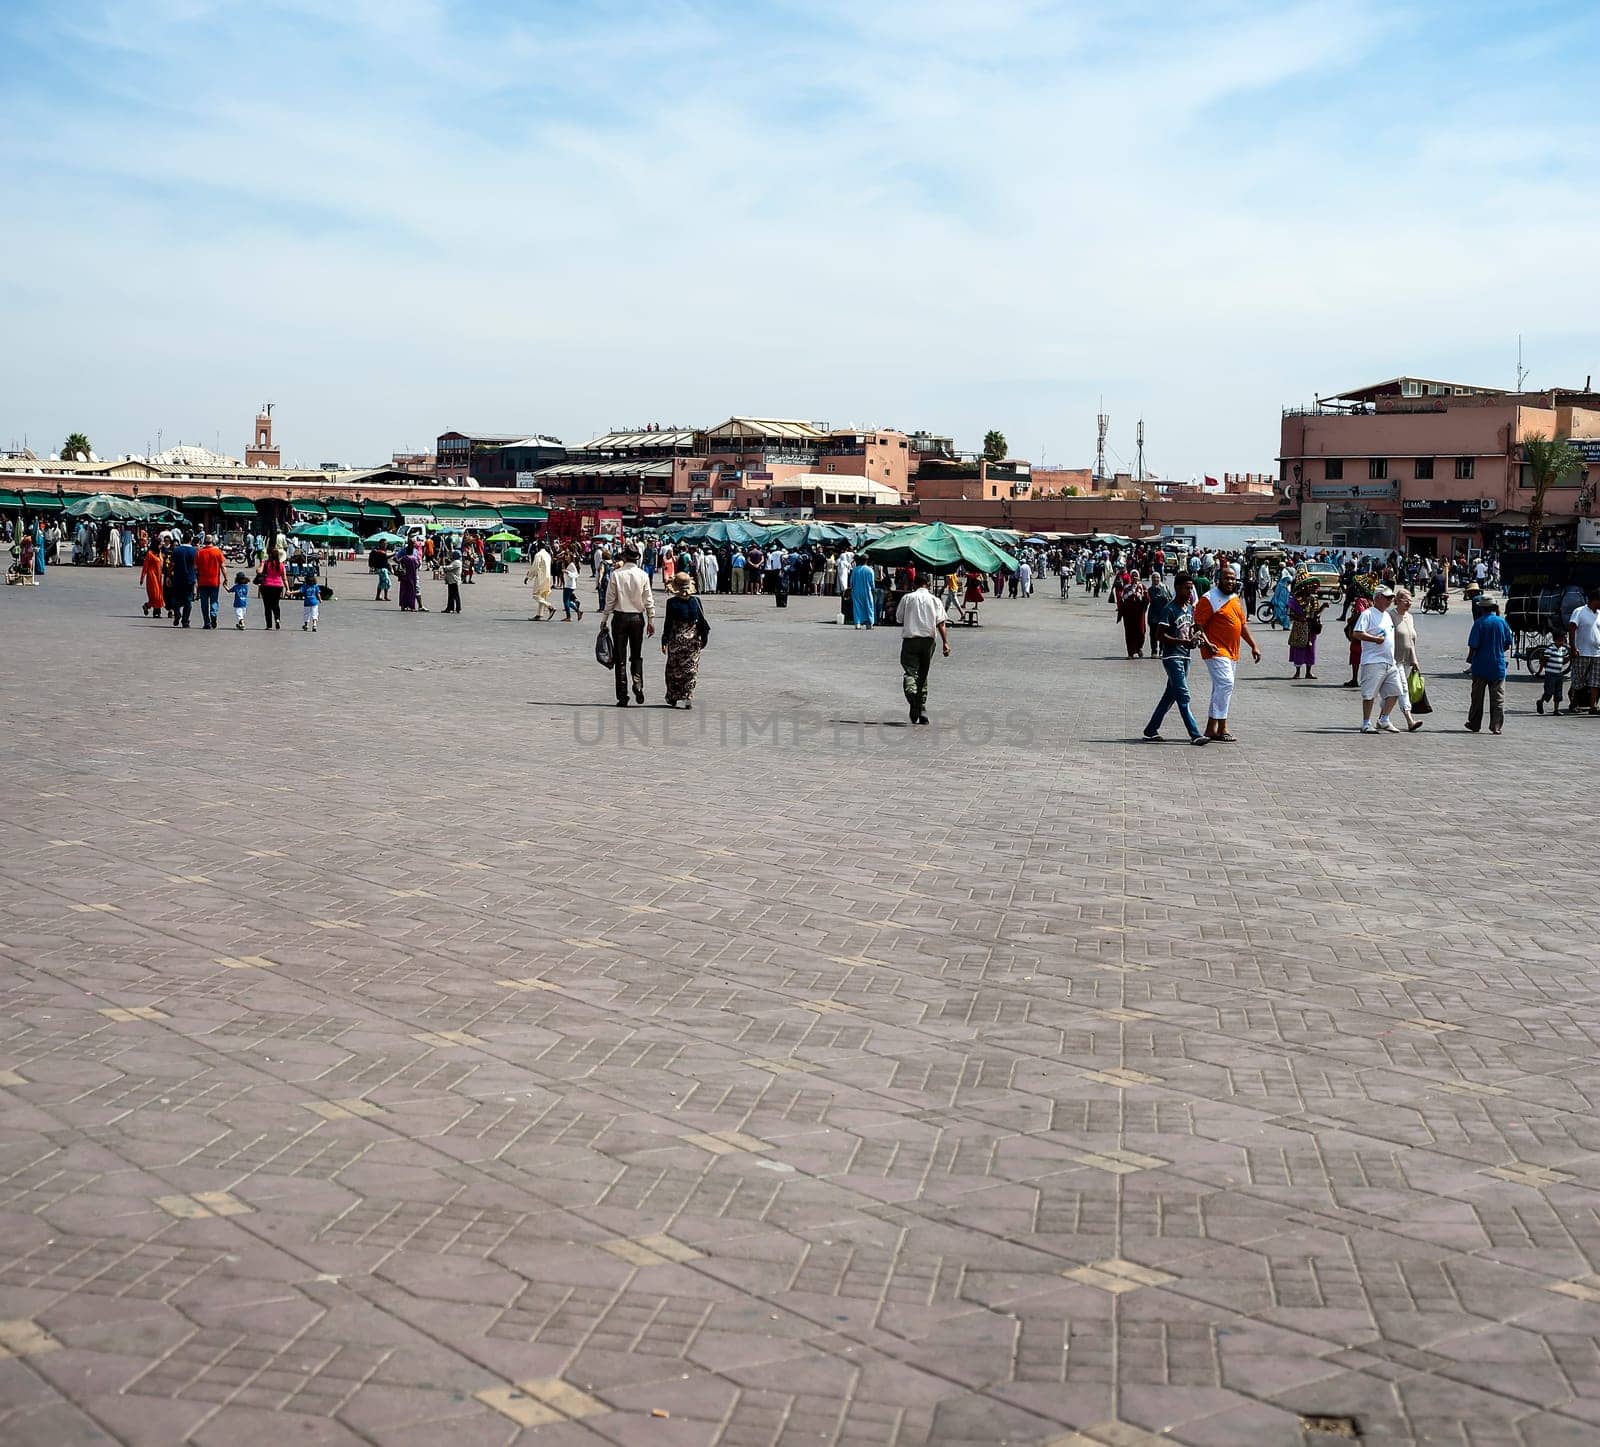 View of Jemaa el fna, Marrakech, Morocco by Giamplume